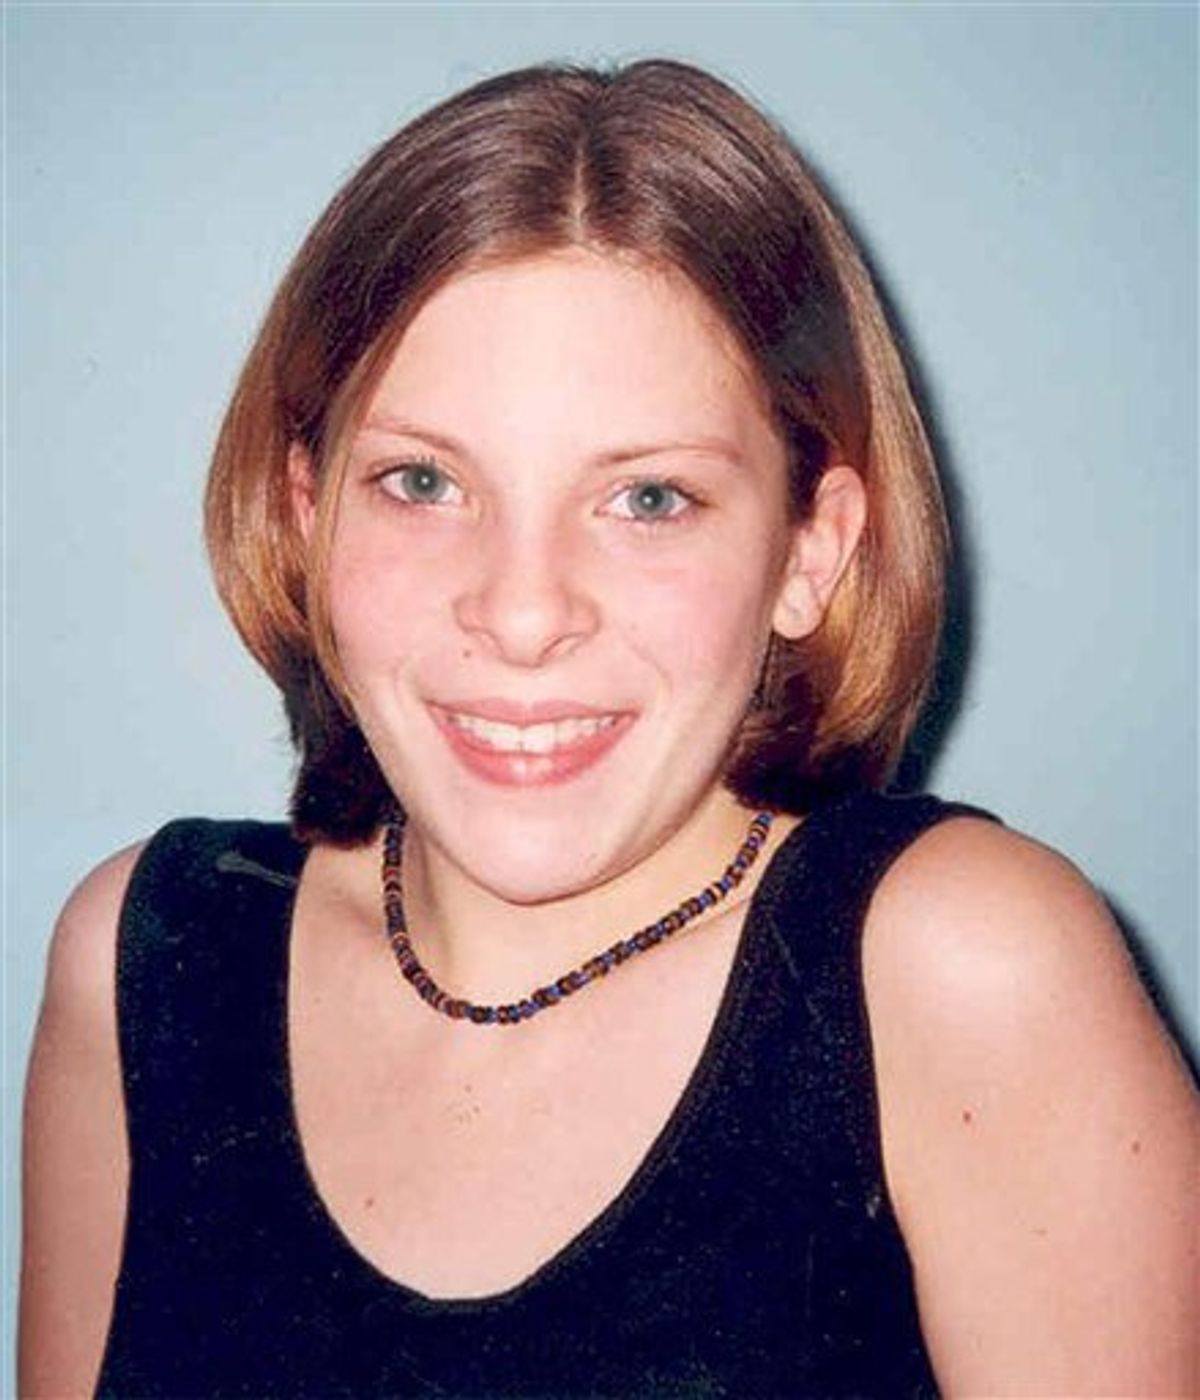 This is an undated Surrey Police handout photo of Milly Dowler made available Monday July 4, 2011 . Britain 's Prime Minister David Cameron said Tuesday Juily 5, 2011 that he is shocked by allegations that a British tabloid hacked into the cellphone of a murdered schoolgirl  Milly Dowler after she went missing. "If they are true, this is a truly dreadful act and a truly dreadful situation," Cameron said about the latest hacking allegations against the News of the World. (AP Photo/Surrey Police. Ho) UNITED KINGDOM OUT NO SALES NO ARCHIVE EDITORIAL USE ONLY (AP)